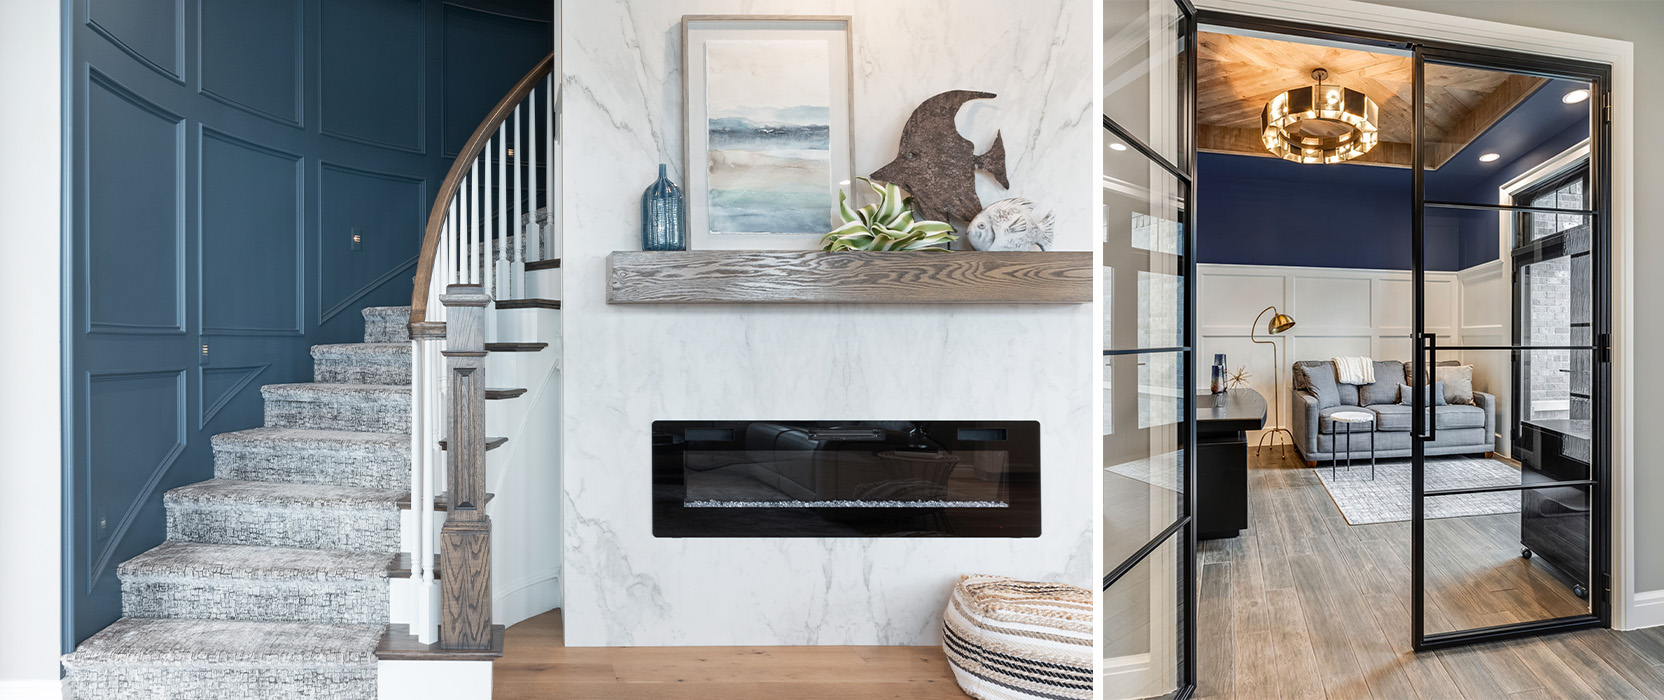 Left image: Carpeted stairwell with blue millwork wall curving around a modern electric fireplace topped by coastal-inspired decor on mantel. Right image: Modern glass French doors with black panes looking into living room with gray couch, white painted molding and navy blue walls.